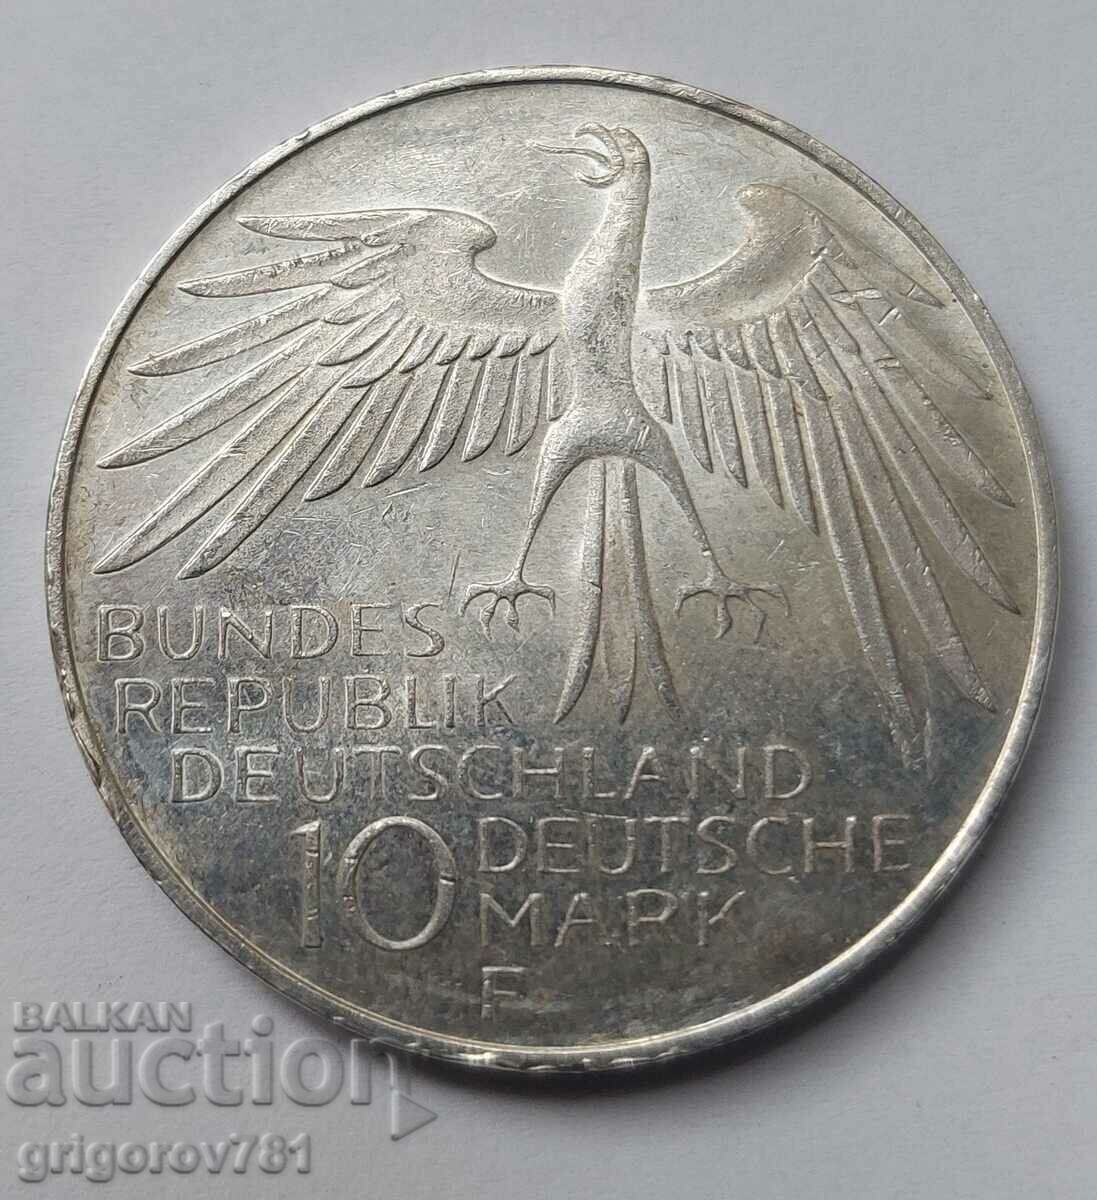 10 marks silver Germany 1972 F - silver coin